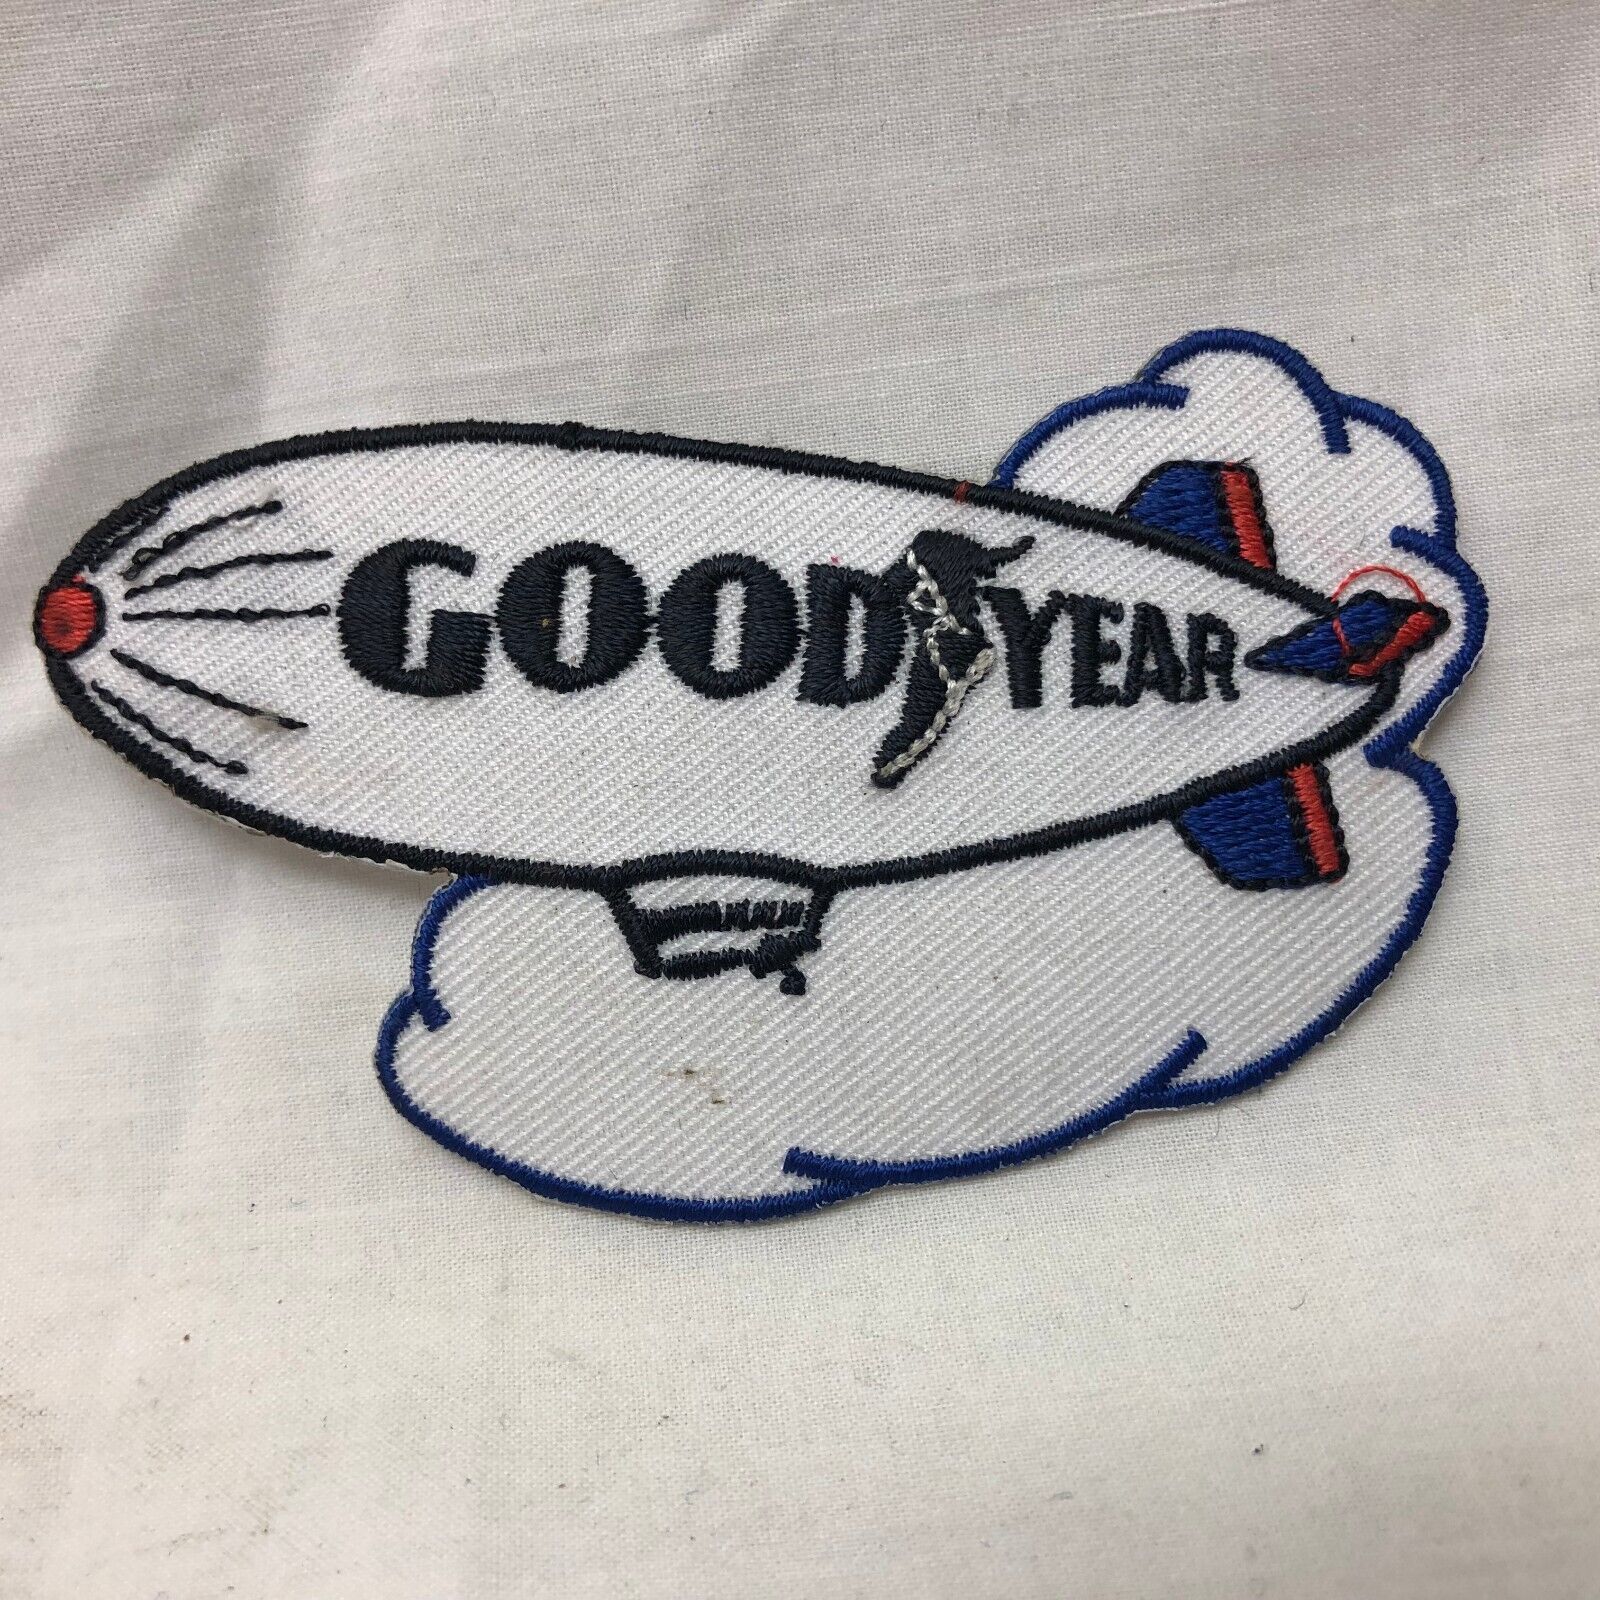 Vintage GOODYEAR Blimp Airship Dirigible Embroidered Patch